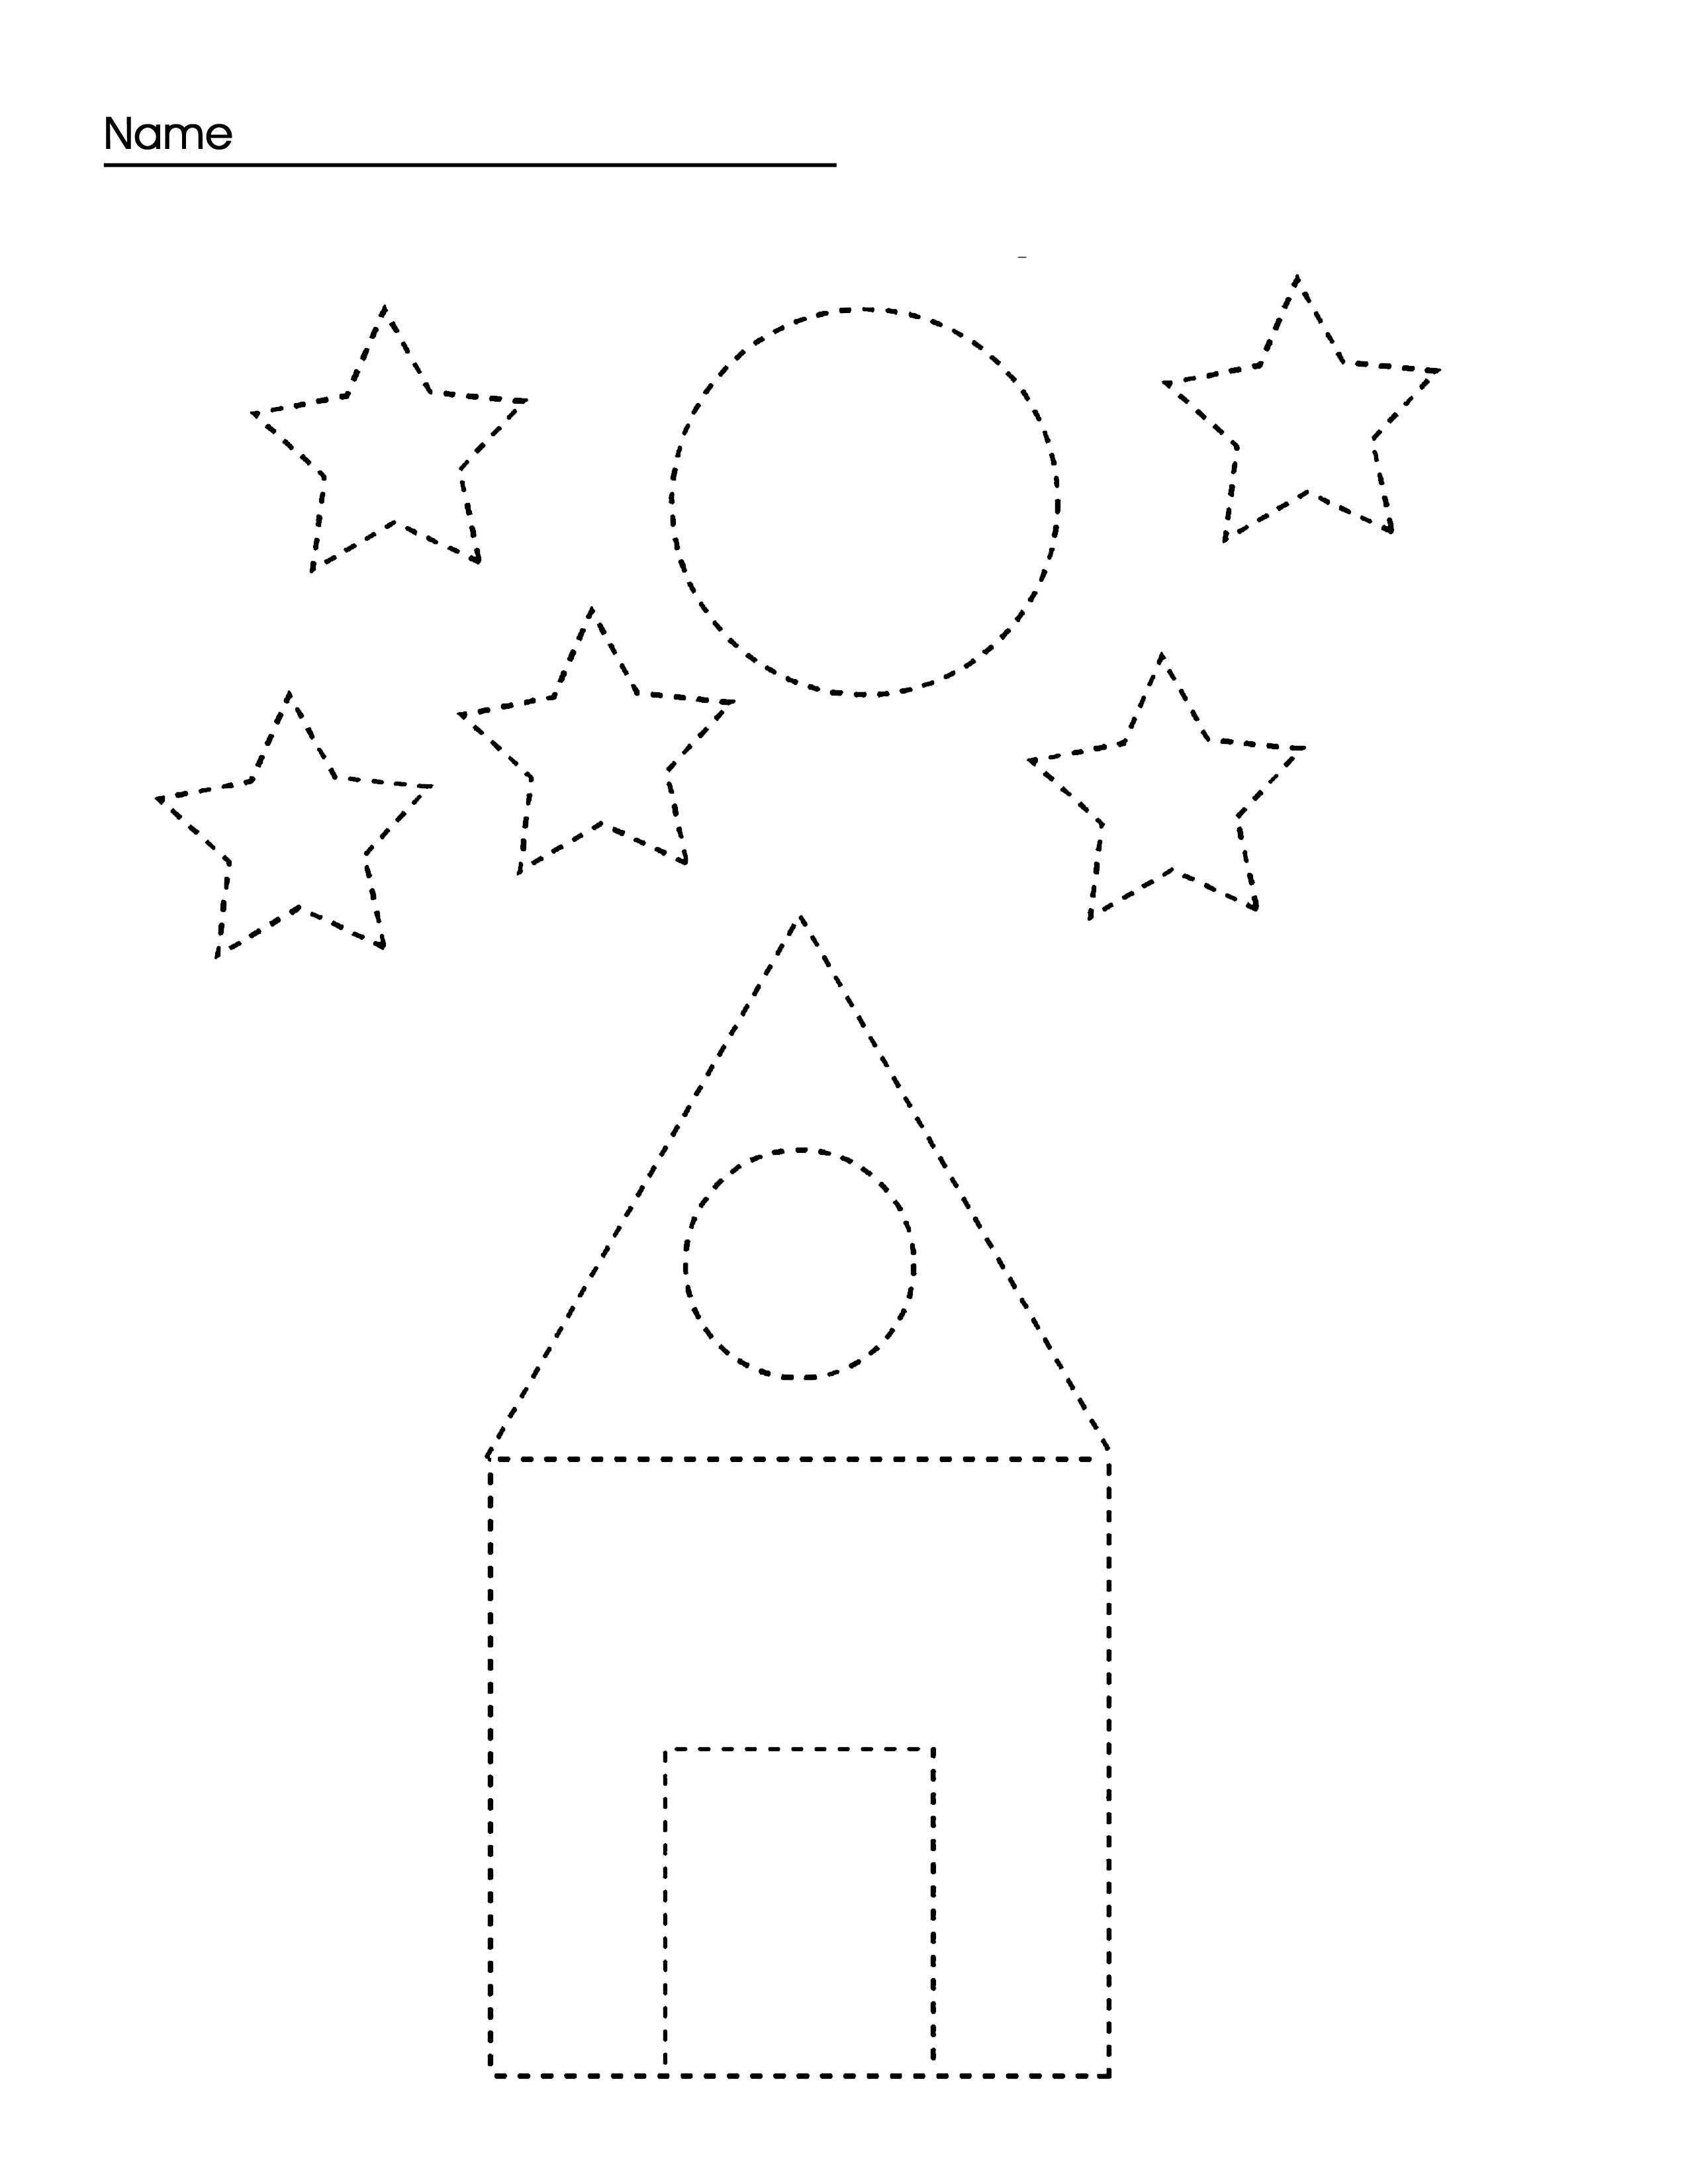 Sun moon and house line tracing preschool activity page